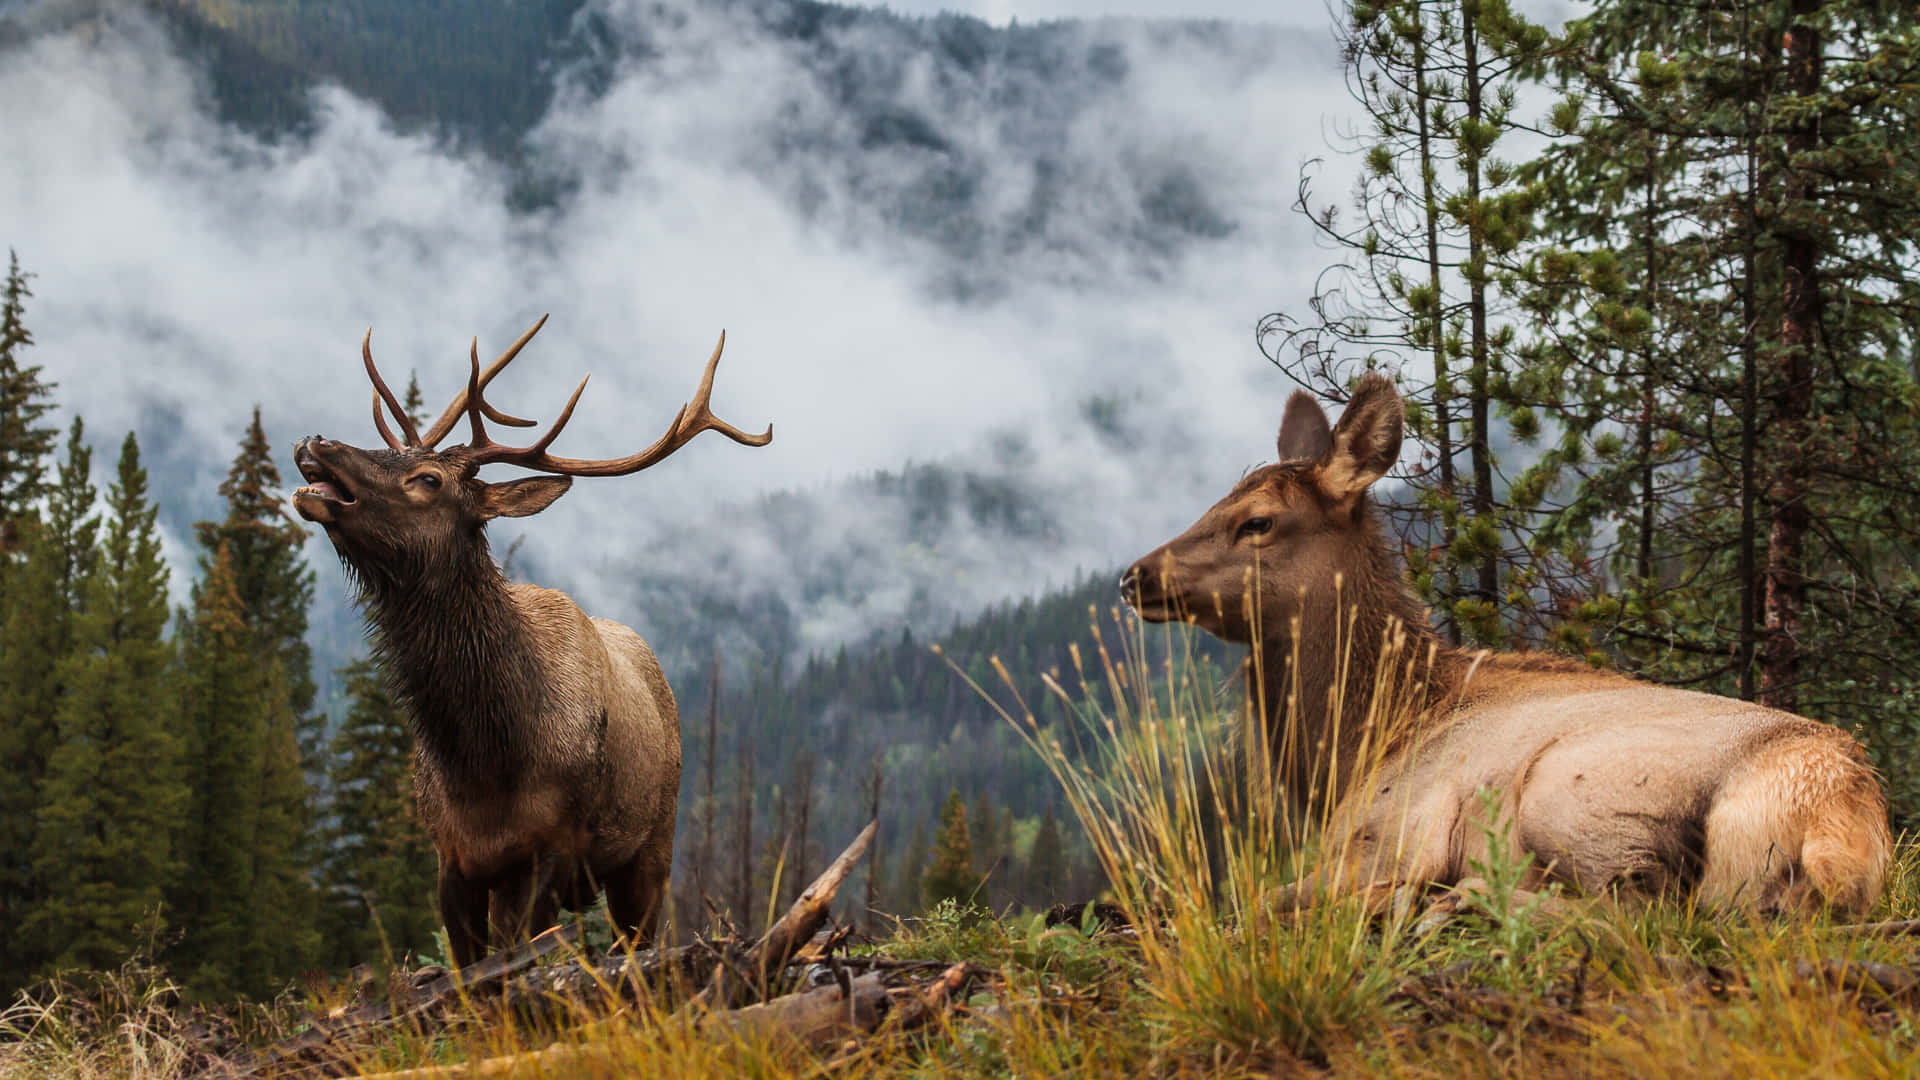 Majestic Elk Walking Through the Forest